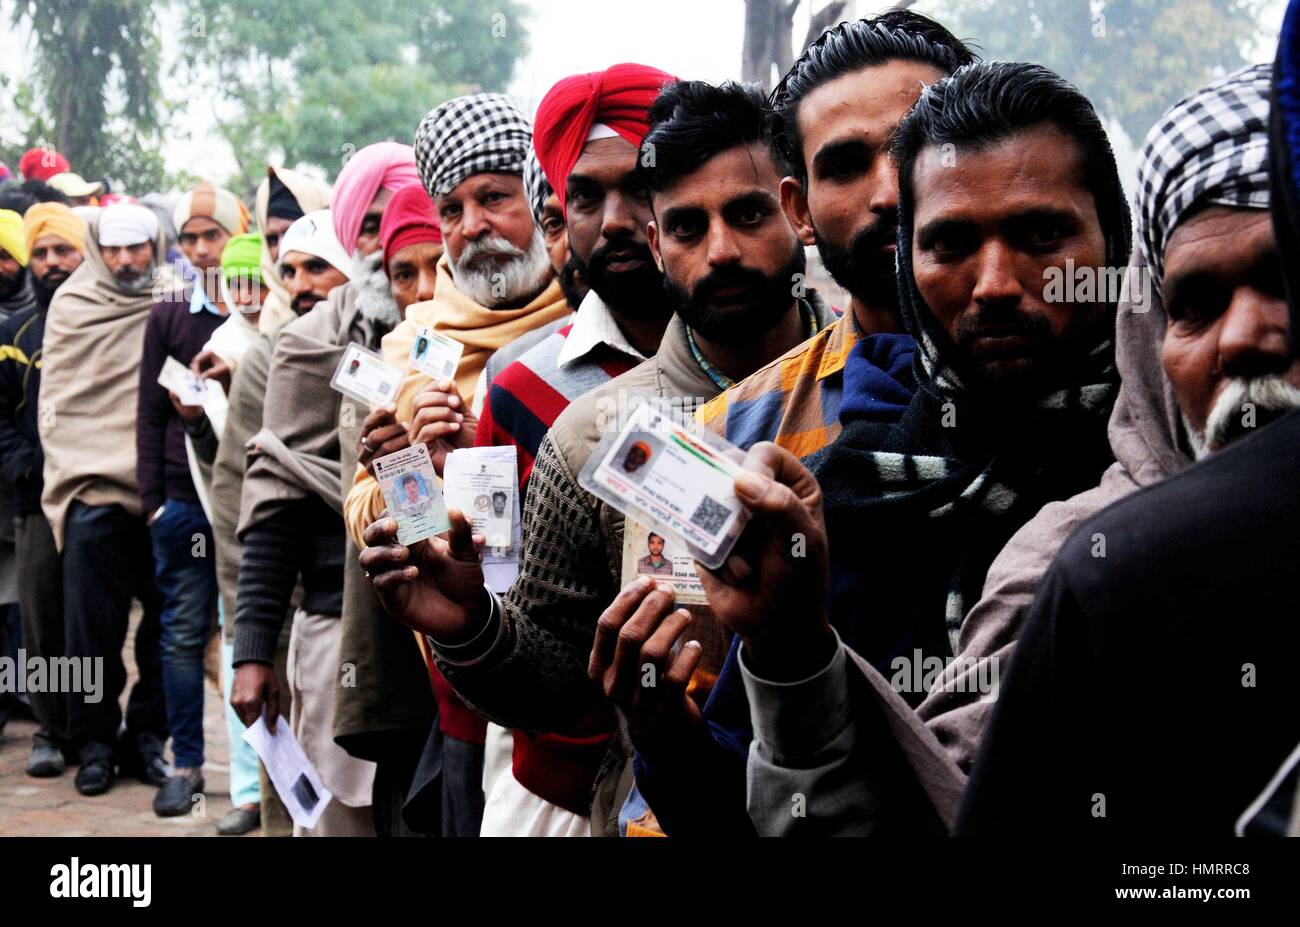 Amritsar, India. 05th Feb, 2017. Indian voters show their identity cards outside a polling booth for assembly election at a village around 25 km from Amritsar, northern Indian state of Punjab, Feb. 4, 2017. Two Indian states, Punjab in the north and Goa in the west, both ruled by the country's ruling Bharatiya Janata Party (BJP), went to polls on Saturday. Credit: Xinhua/Alamy Live News Stock Photo